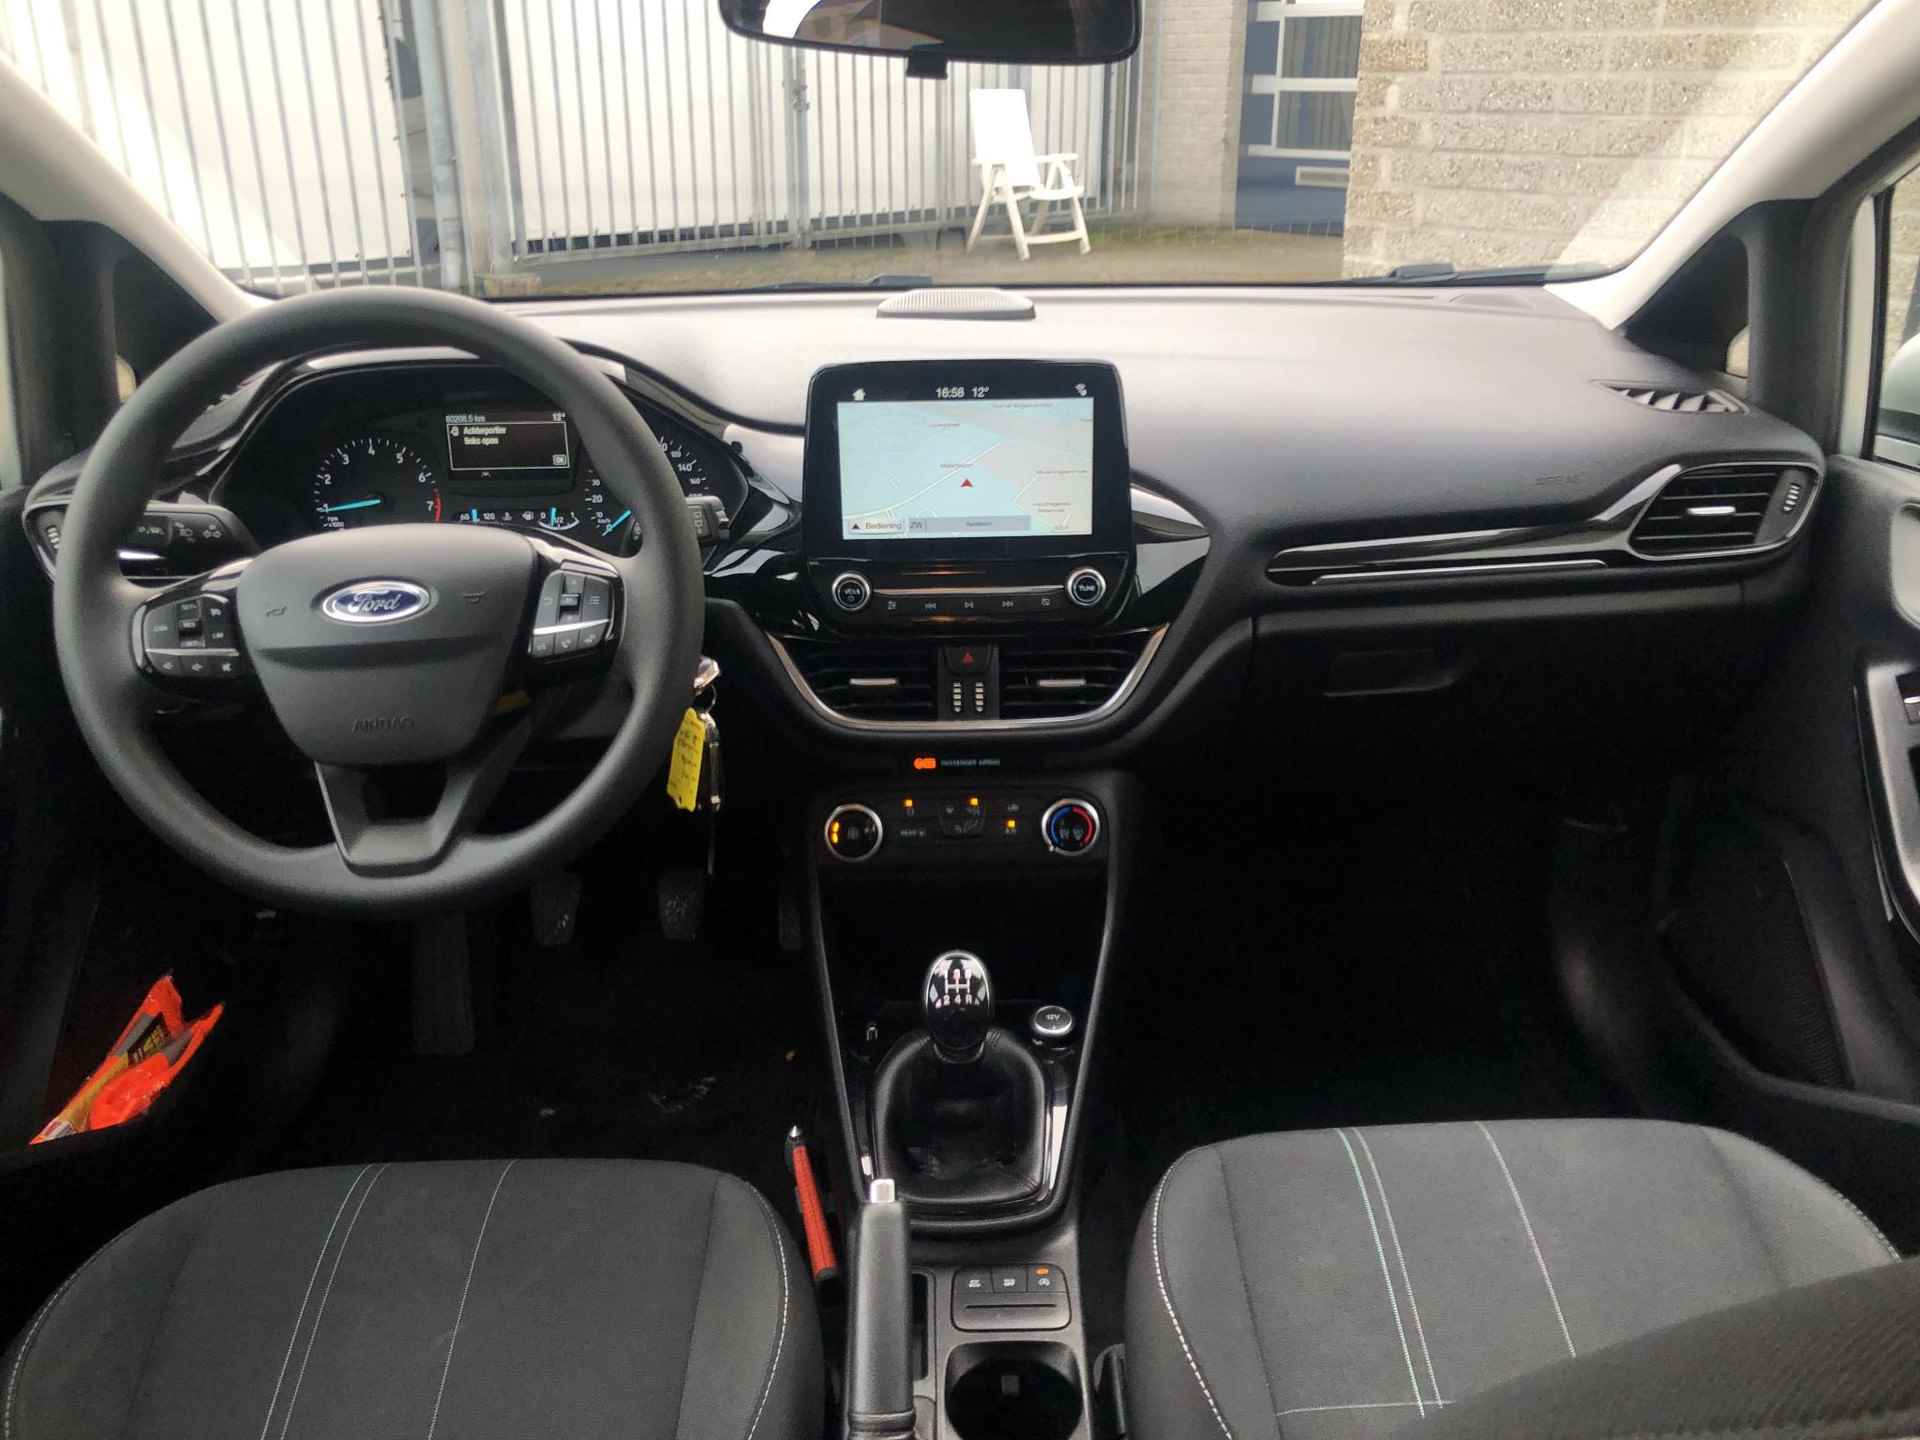 Ford Fiesta 1.1 85pk Trend l Navigatie l Apple Carplay/Android Auto l Airconditioning l Cruise control - 11/23